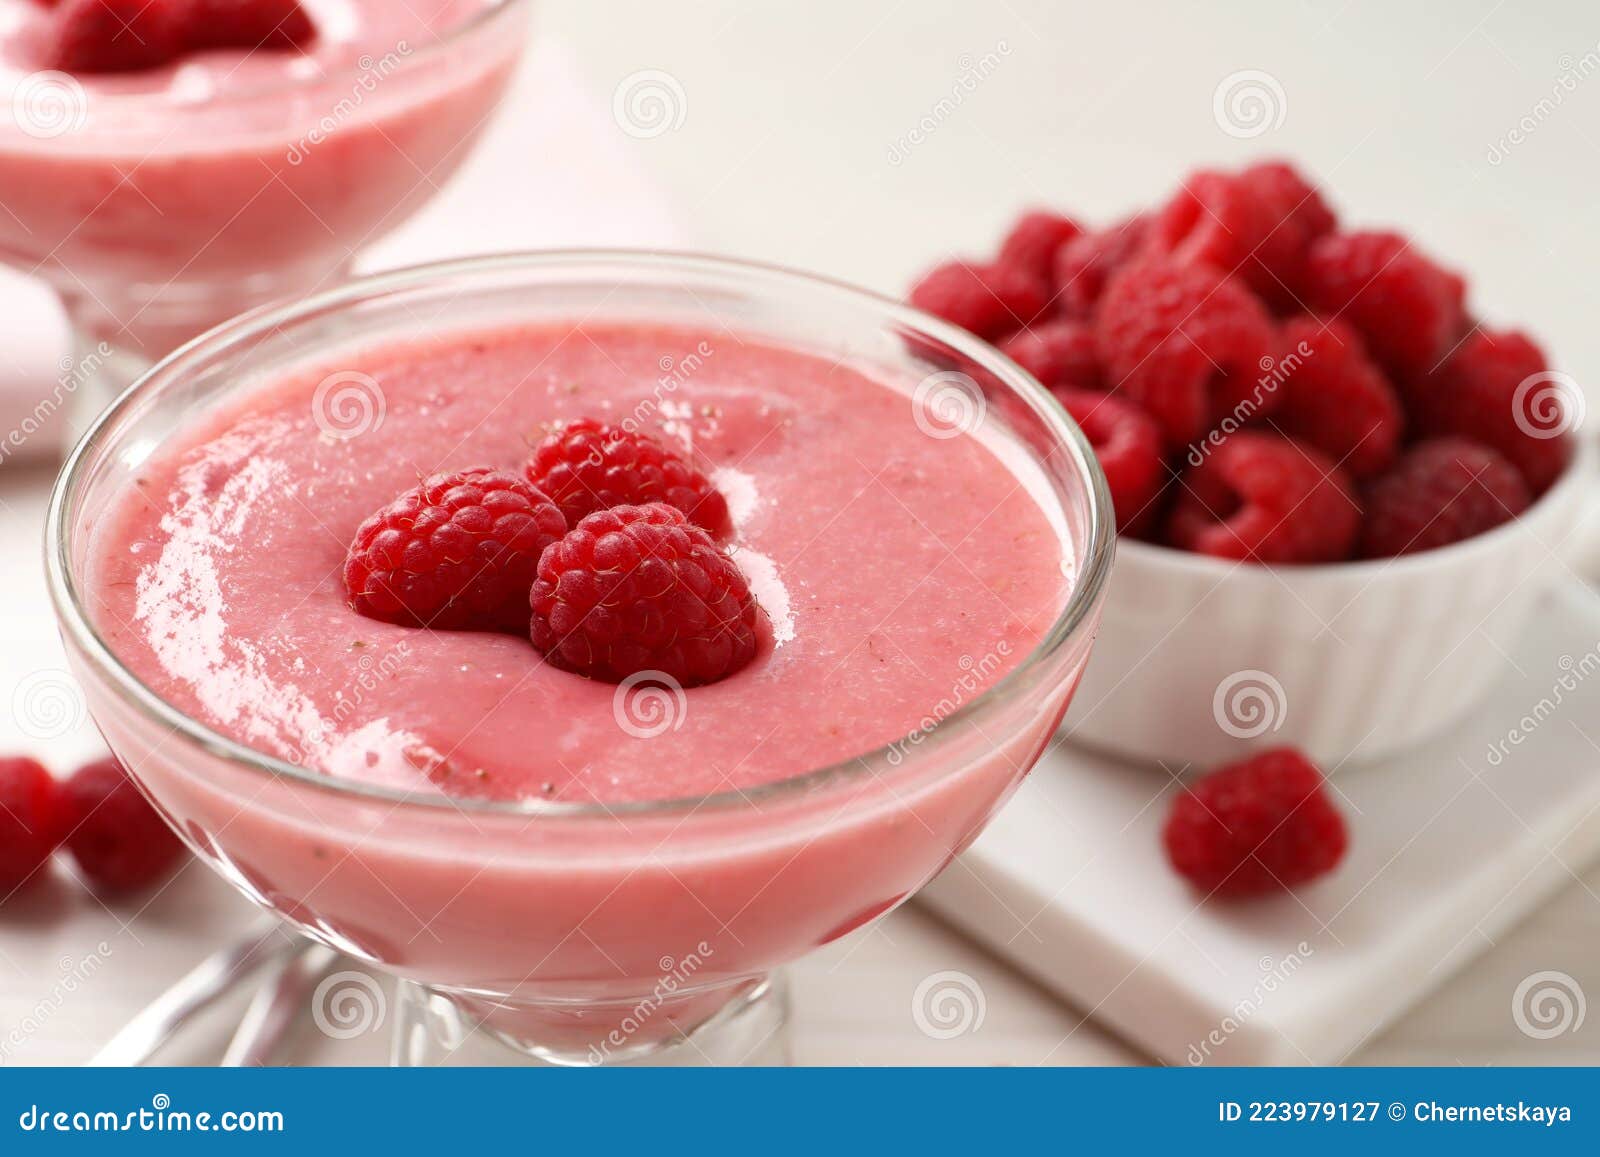 glass of delicious raspberry mousse on table, closeup view